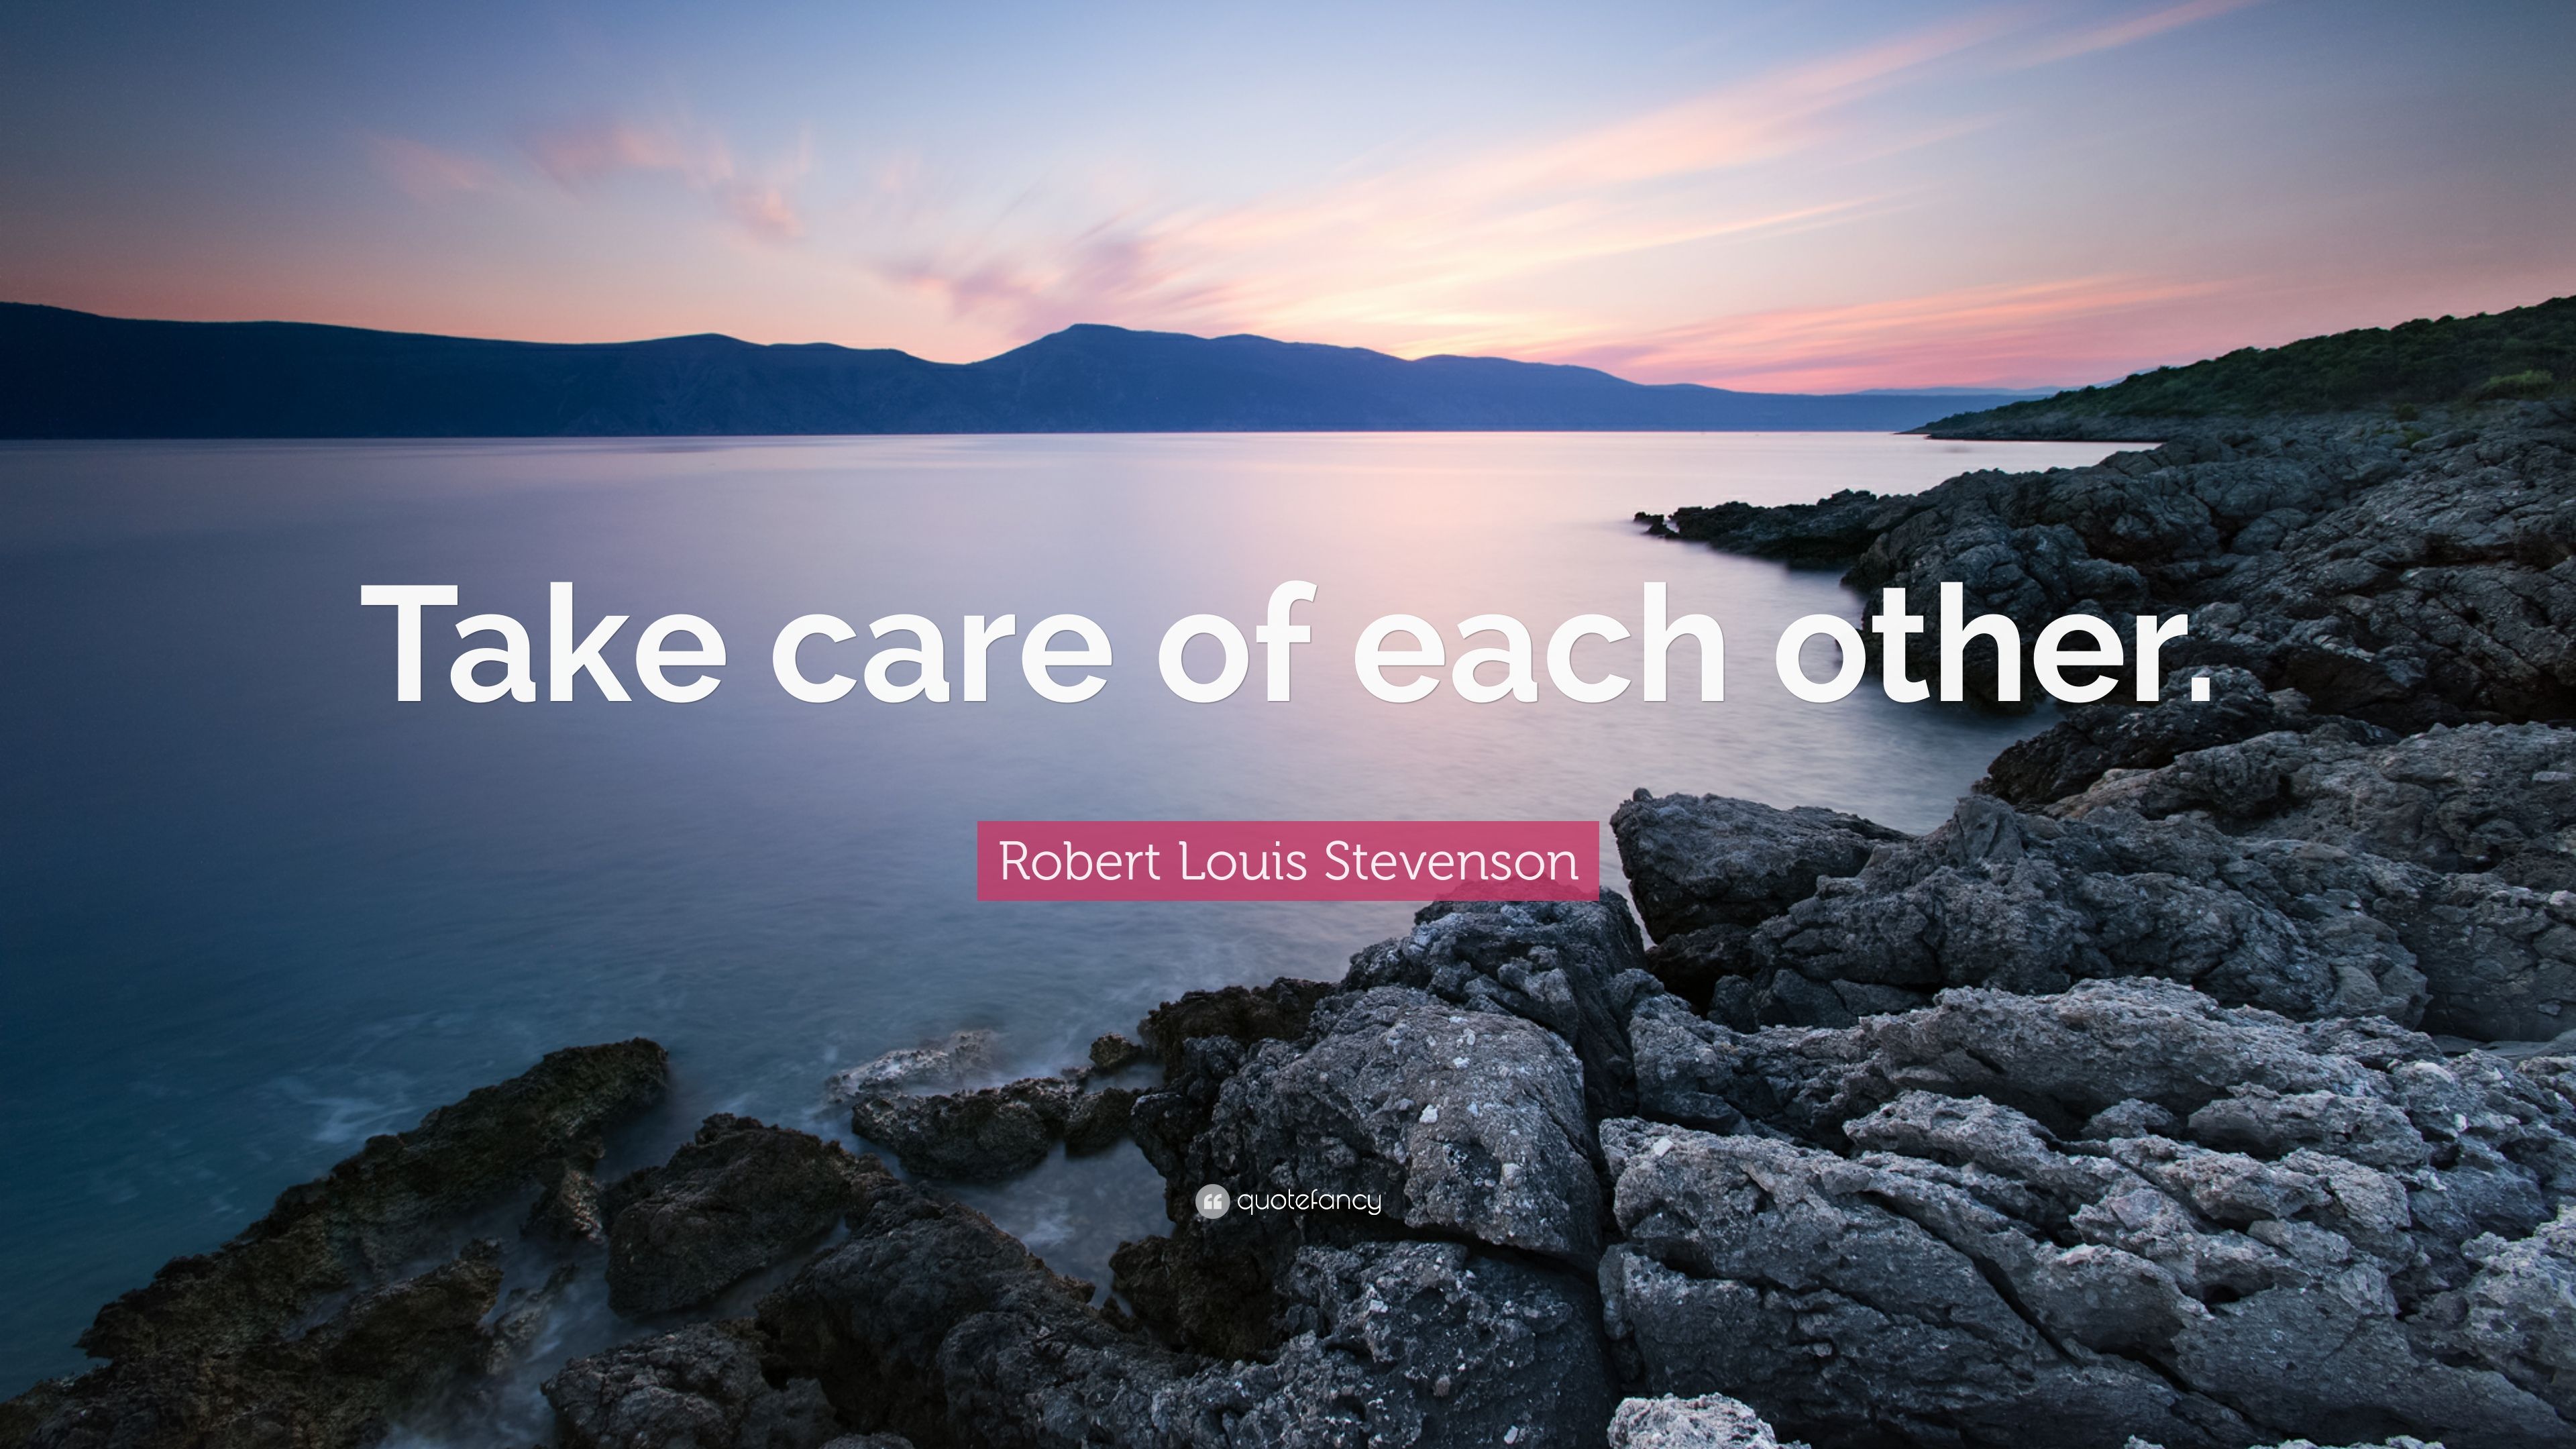 Robert Louis Stevenson Quote: “Take care of each other.” 12